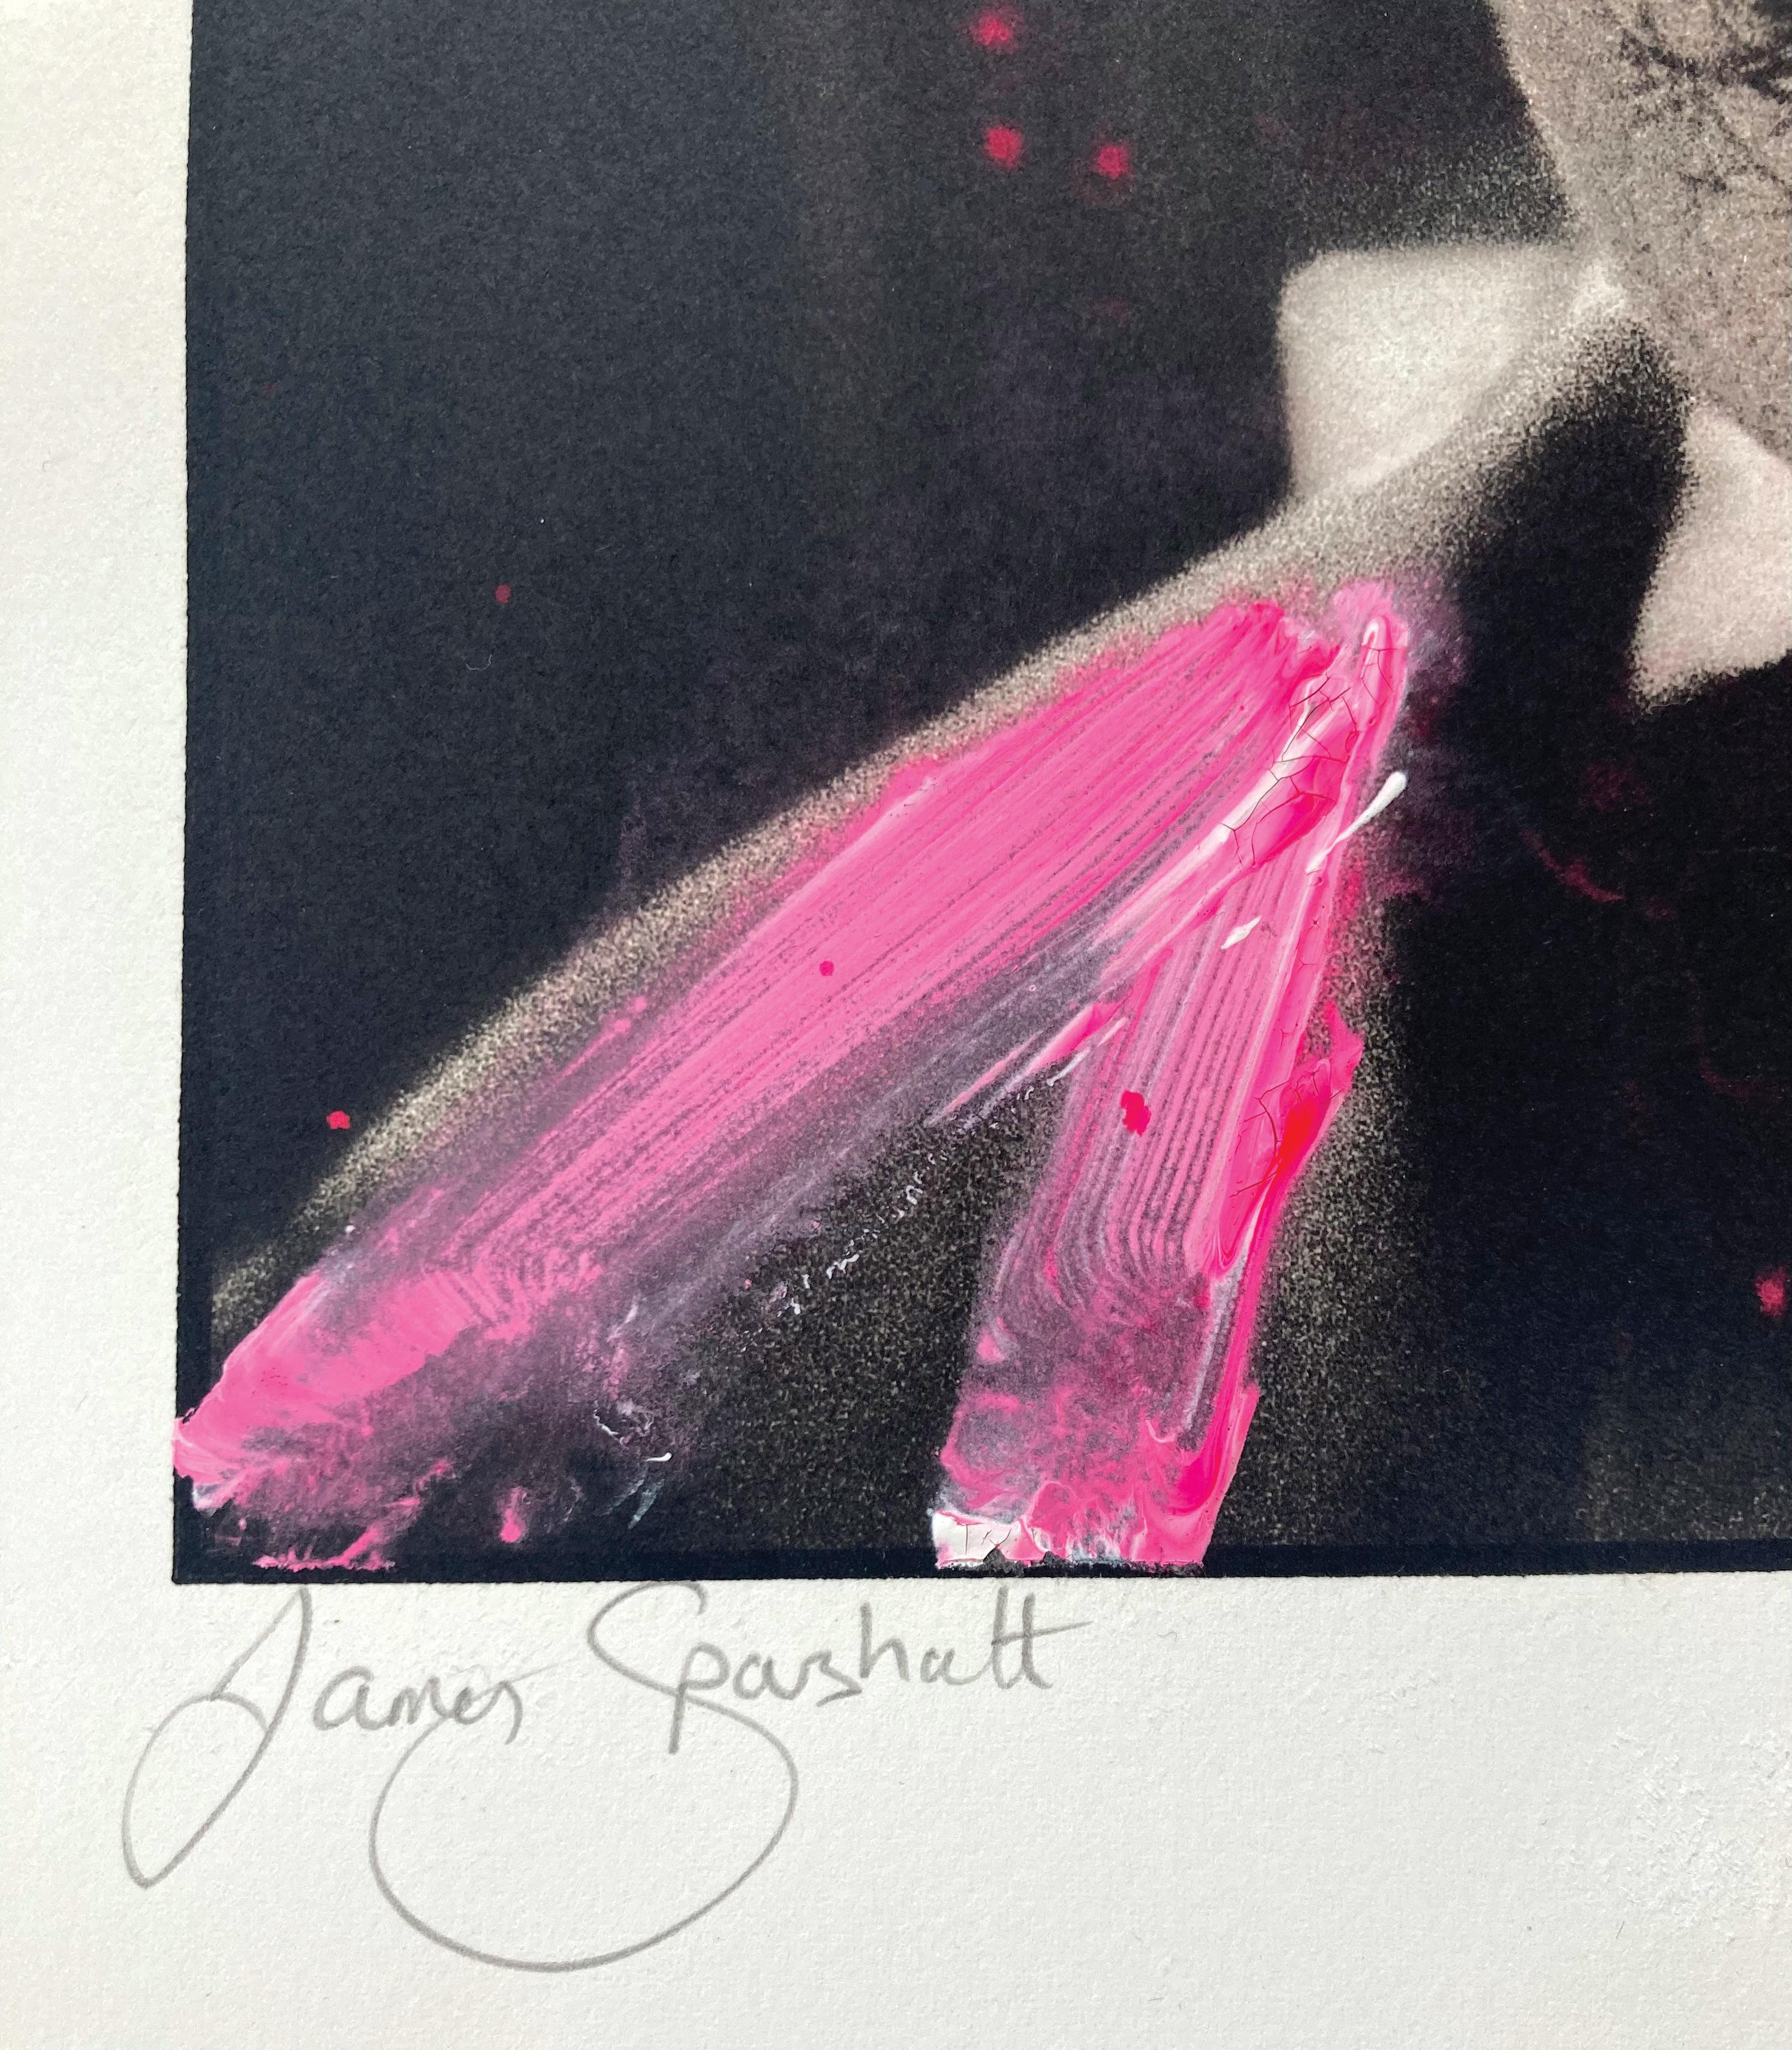 Sparshatt Dalzell is a collaboration between  photographer James Sparshatt and painter Rachael Dalzell.  

These works combine the exacting and time consuming artistry of the palladium platinum printing process with Dalzell's expressive and